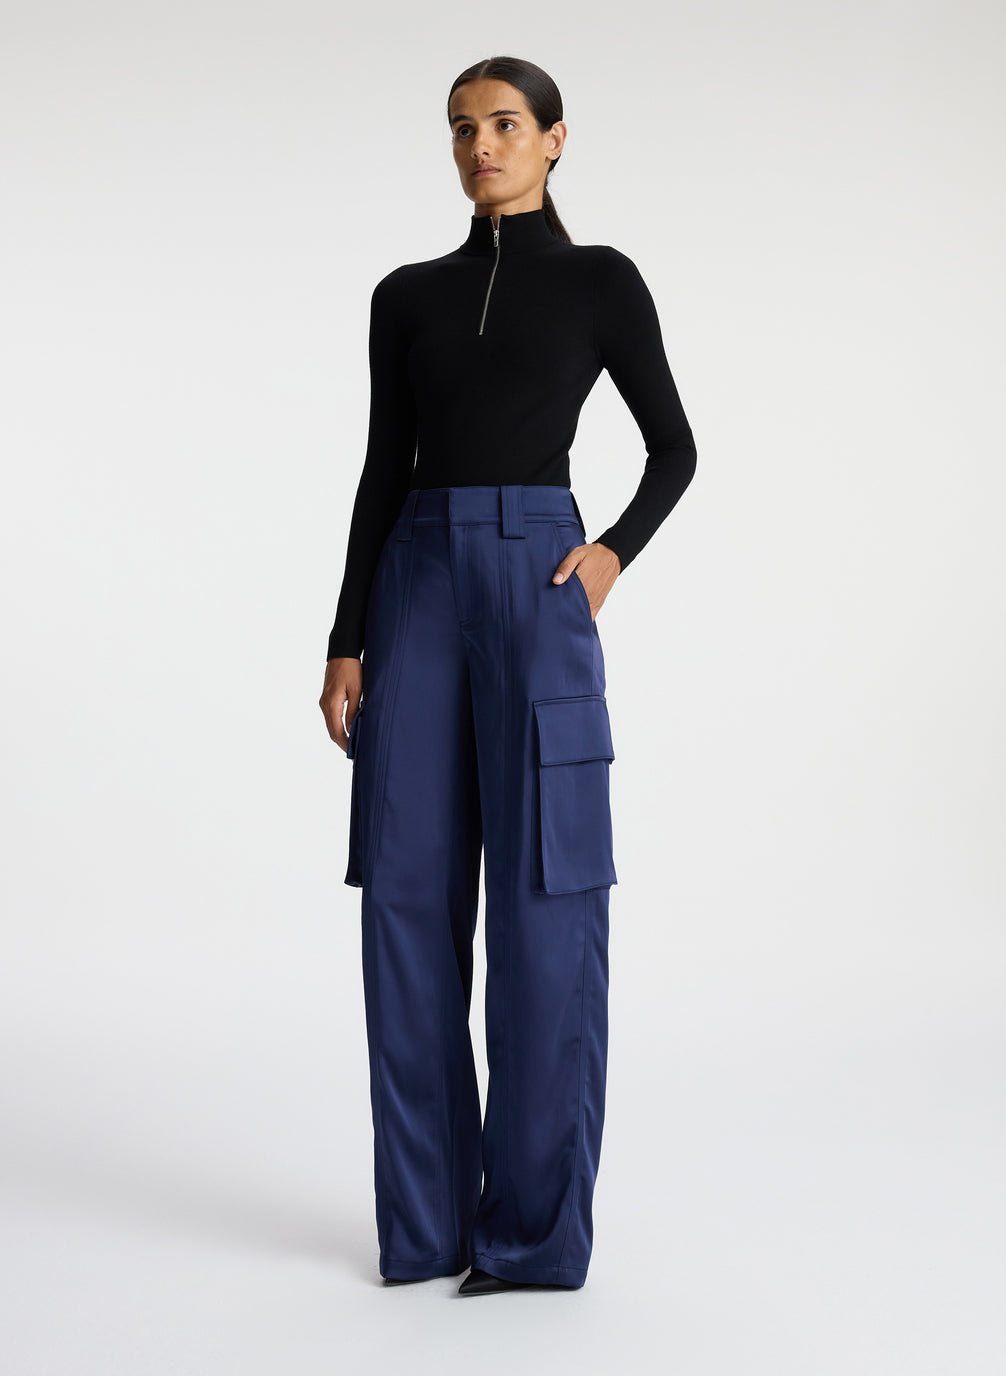 side view of woman wearing black knit long sleeve top and blue satin cargo pants